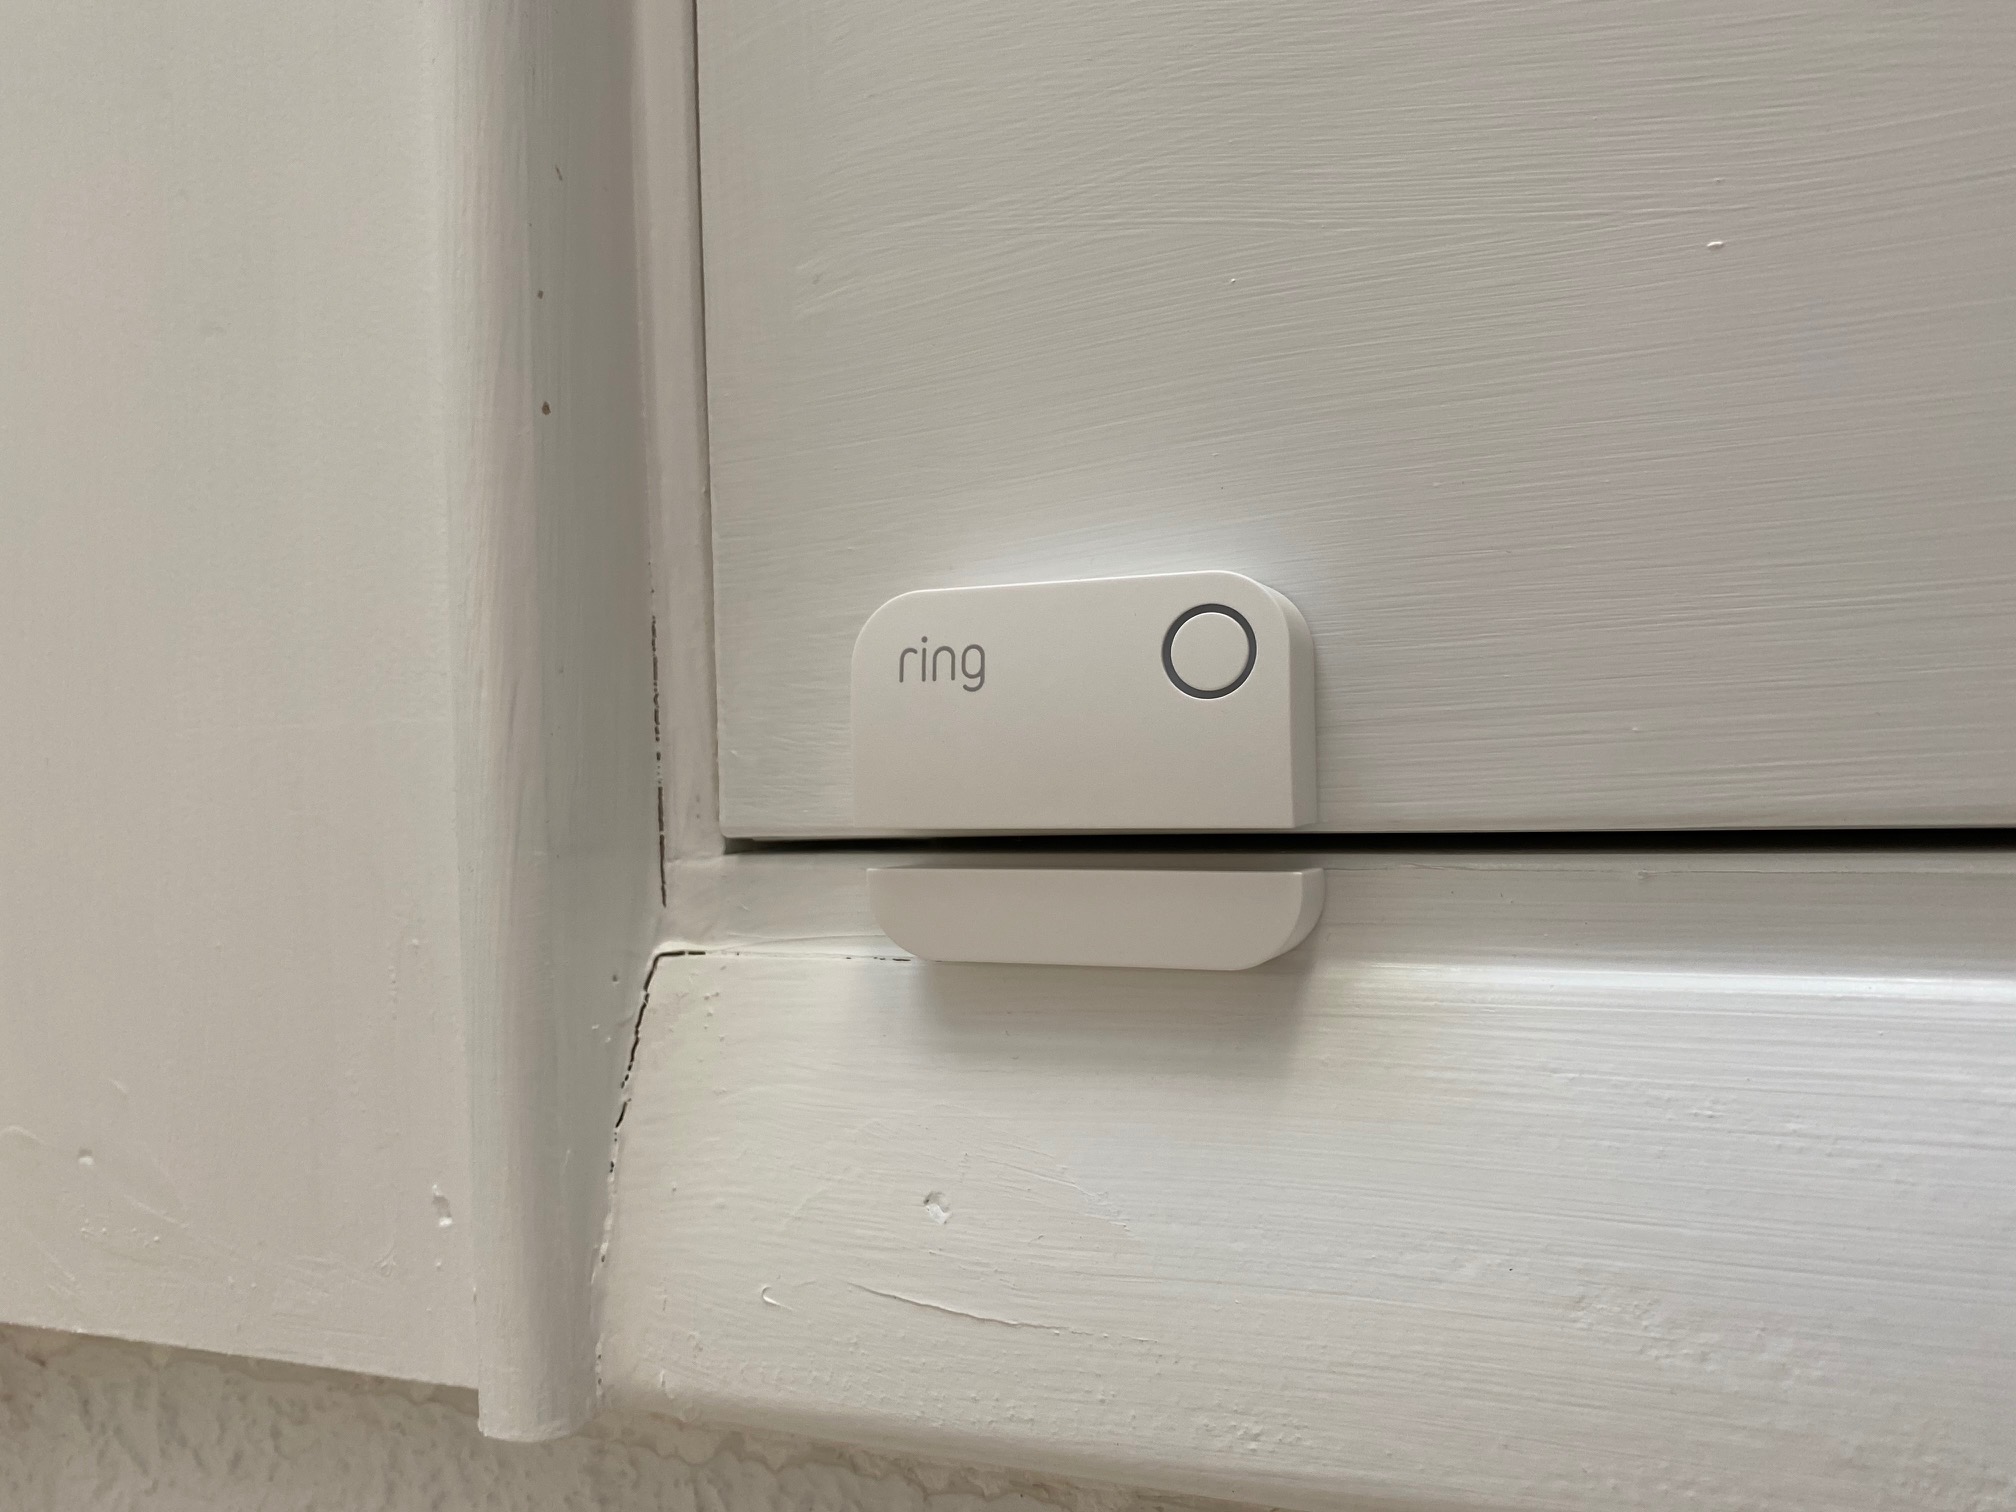 Need Help Pairing Ring Contact Sensor to SmartThings Hub - Devices &  Integrations - SmartThings Community